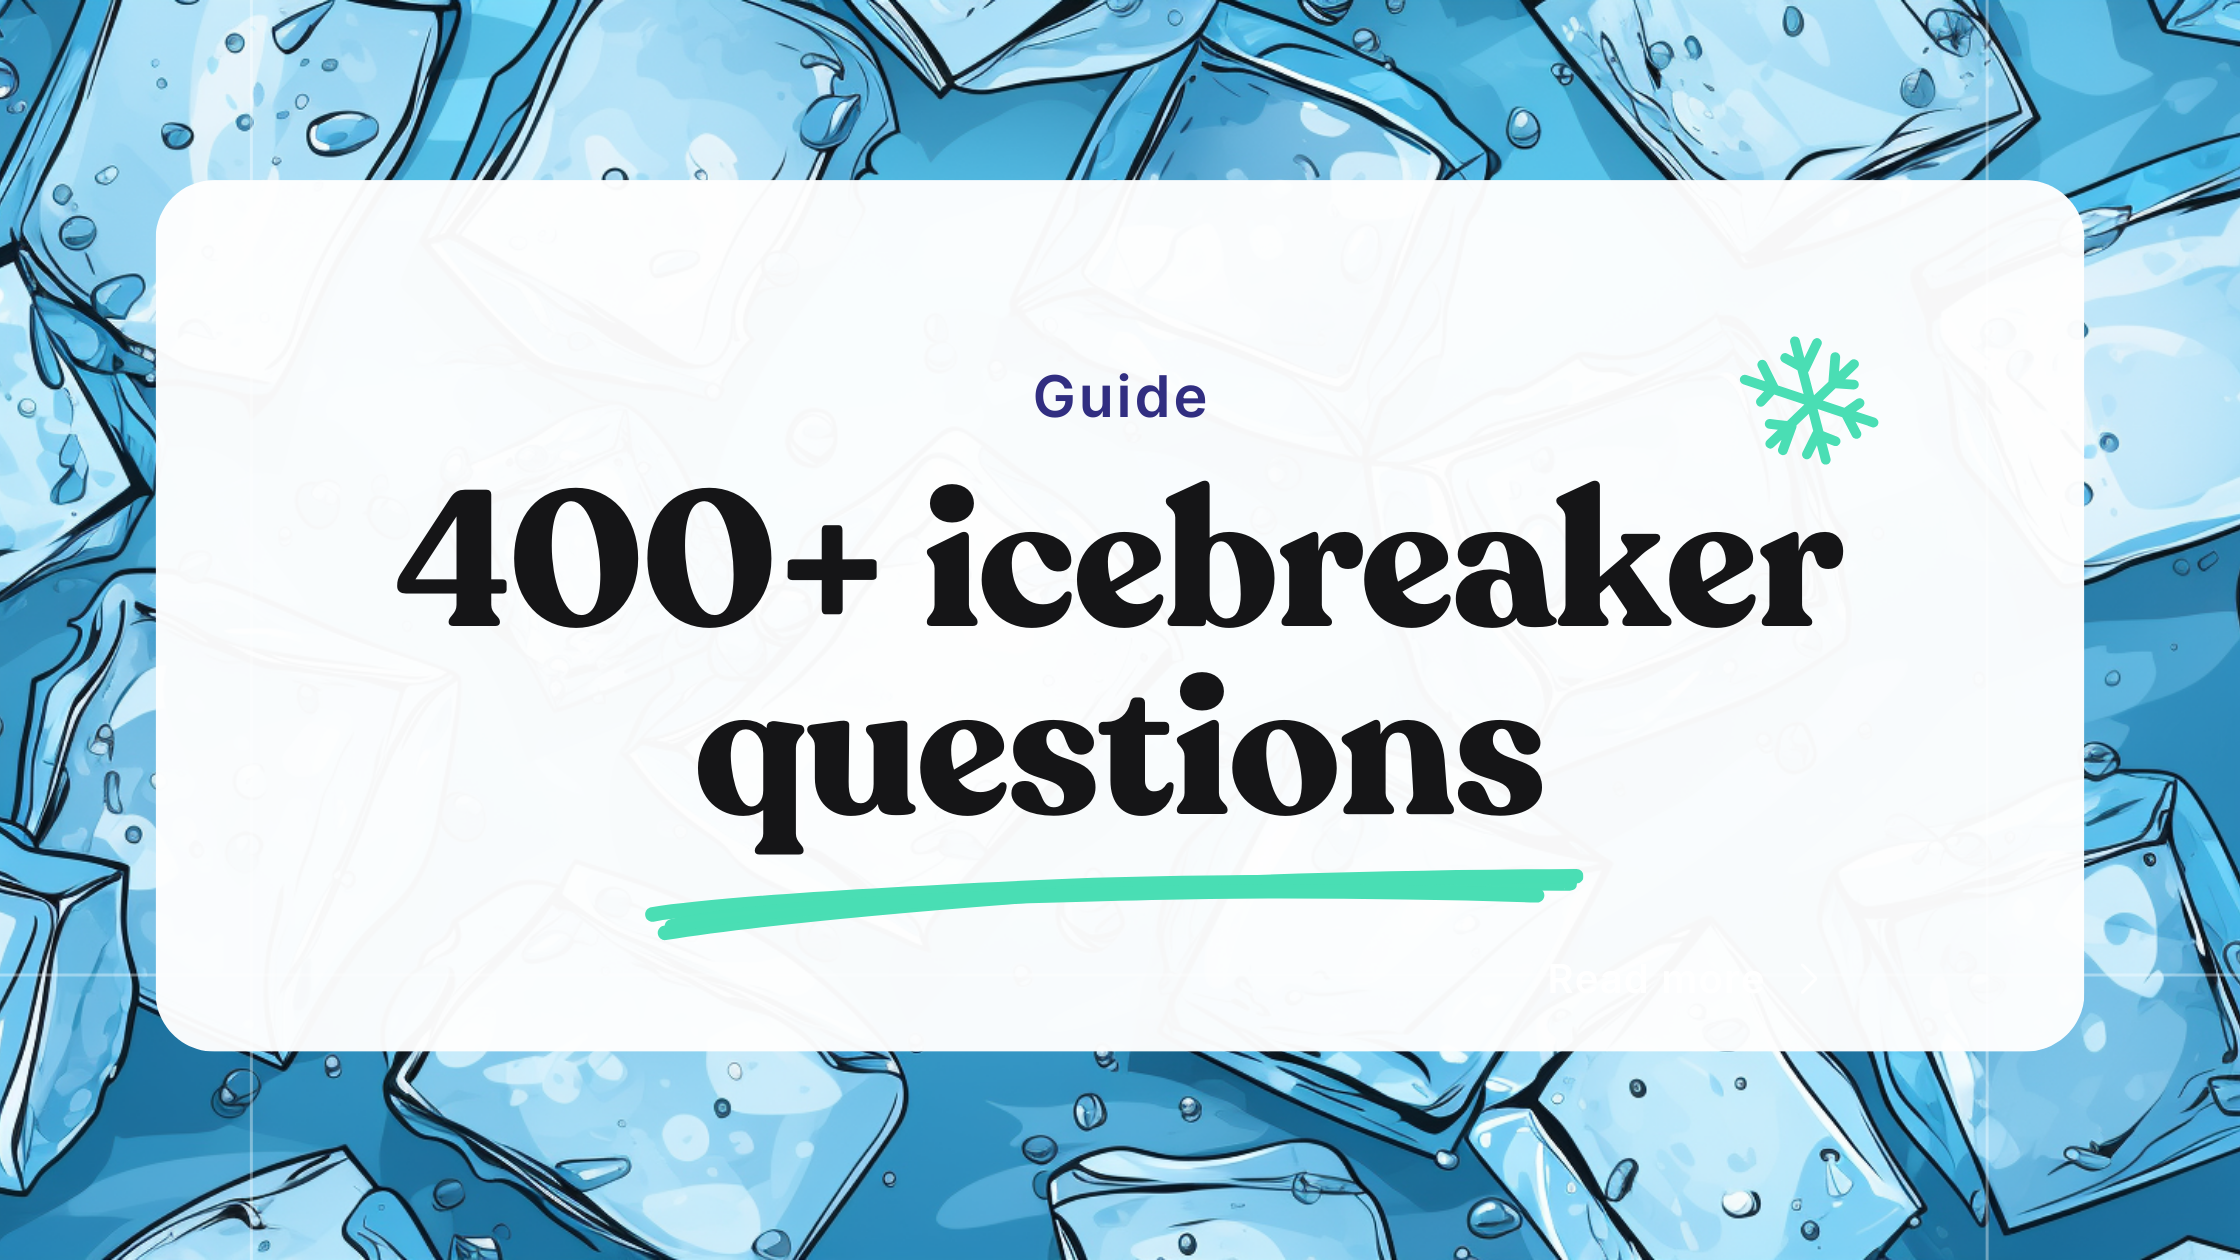 400+ icebreaker questions for work, fun, dating & more